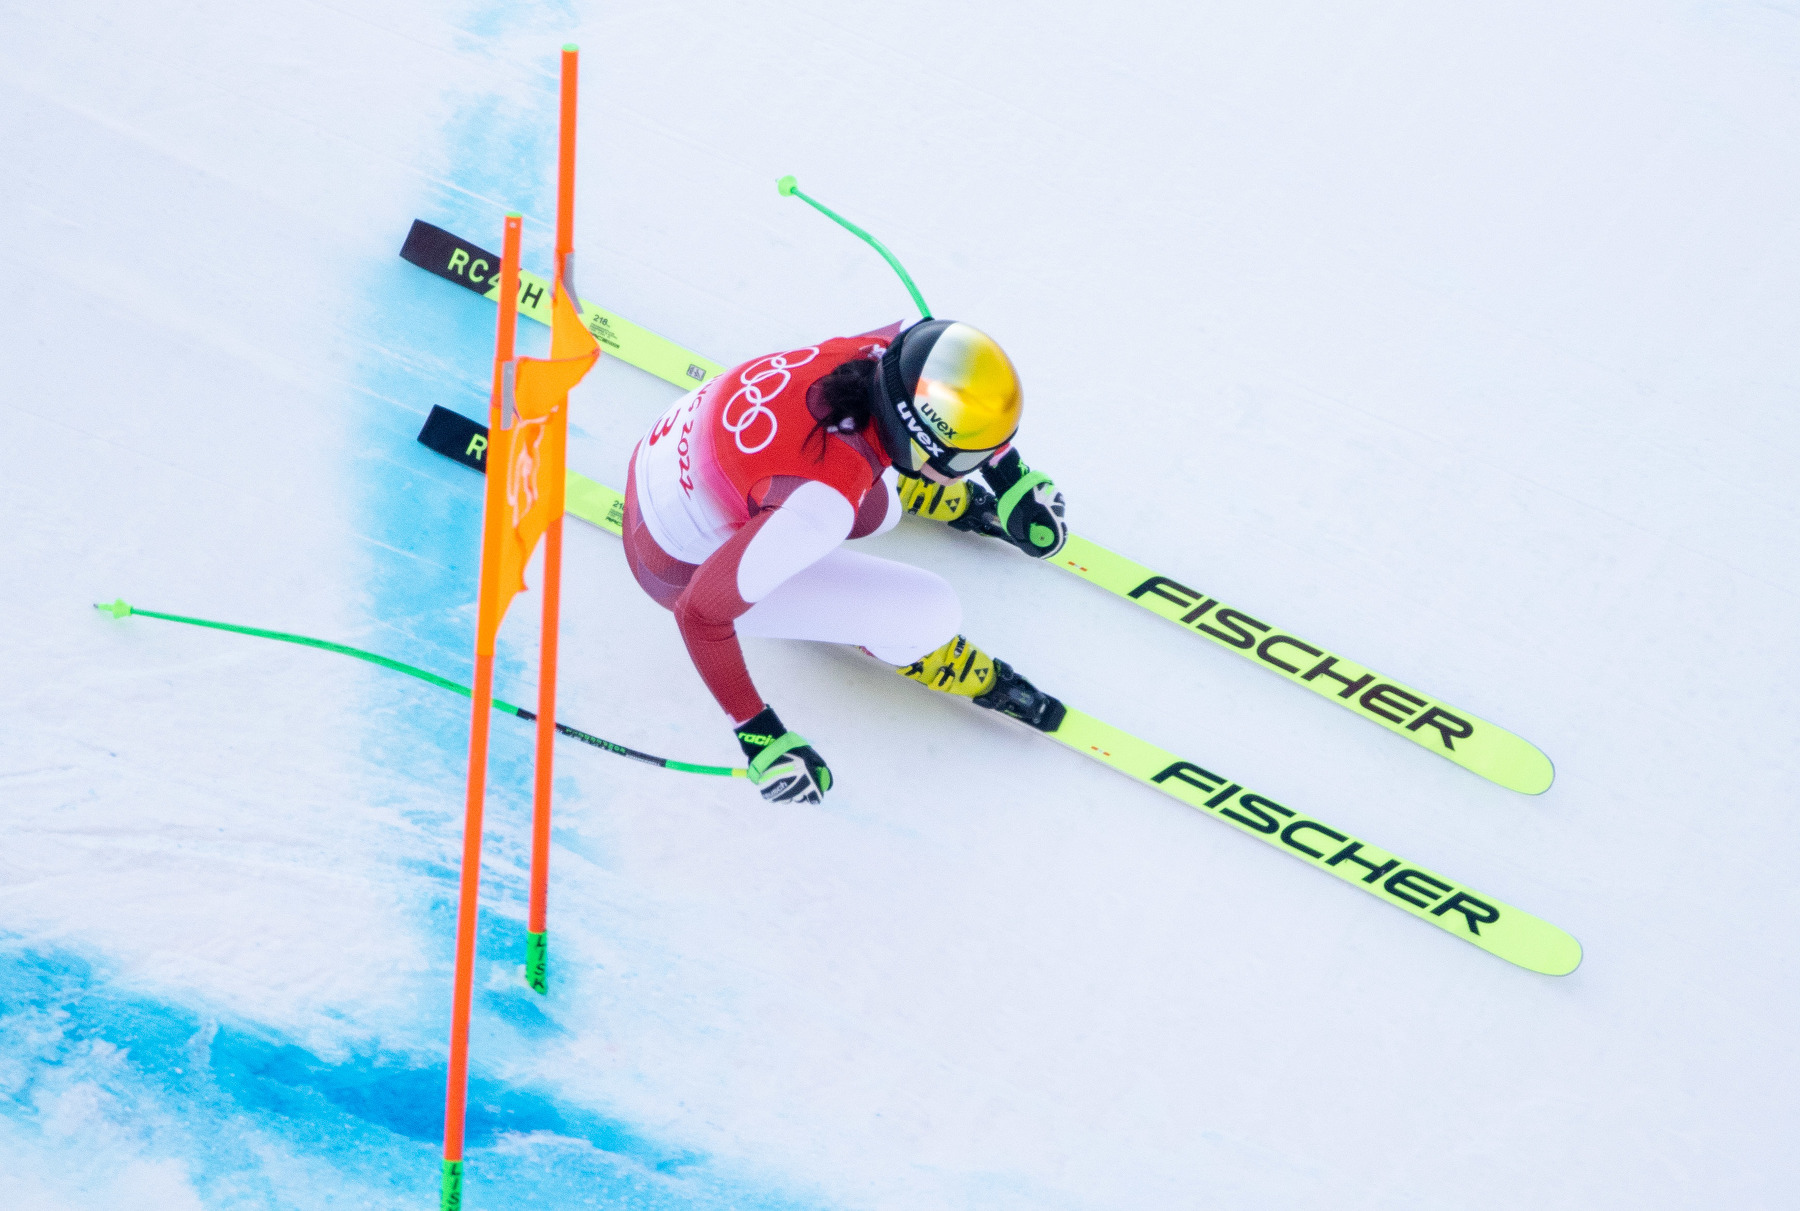 YANQING,CHINA,17.FEB.22 - OLYMPICS, ALPINE SKIING - Winter Olympic Games Beijing 2022, alpine combined, downhill, ladies. Image shows Katharina Huber (AUT). Photo: GEPA pictures/ Harald Steiner